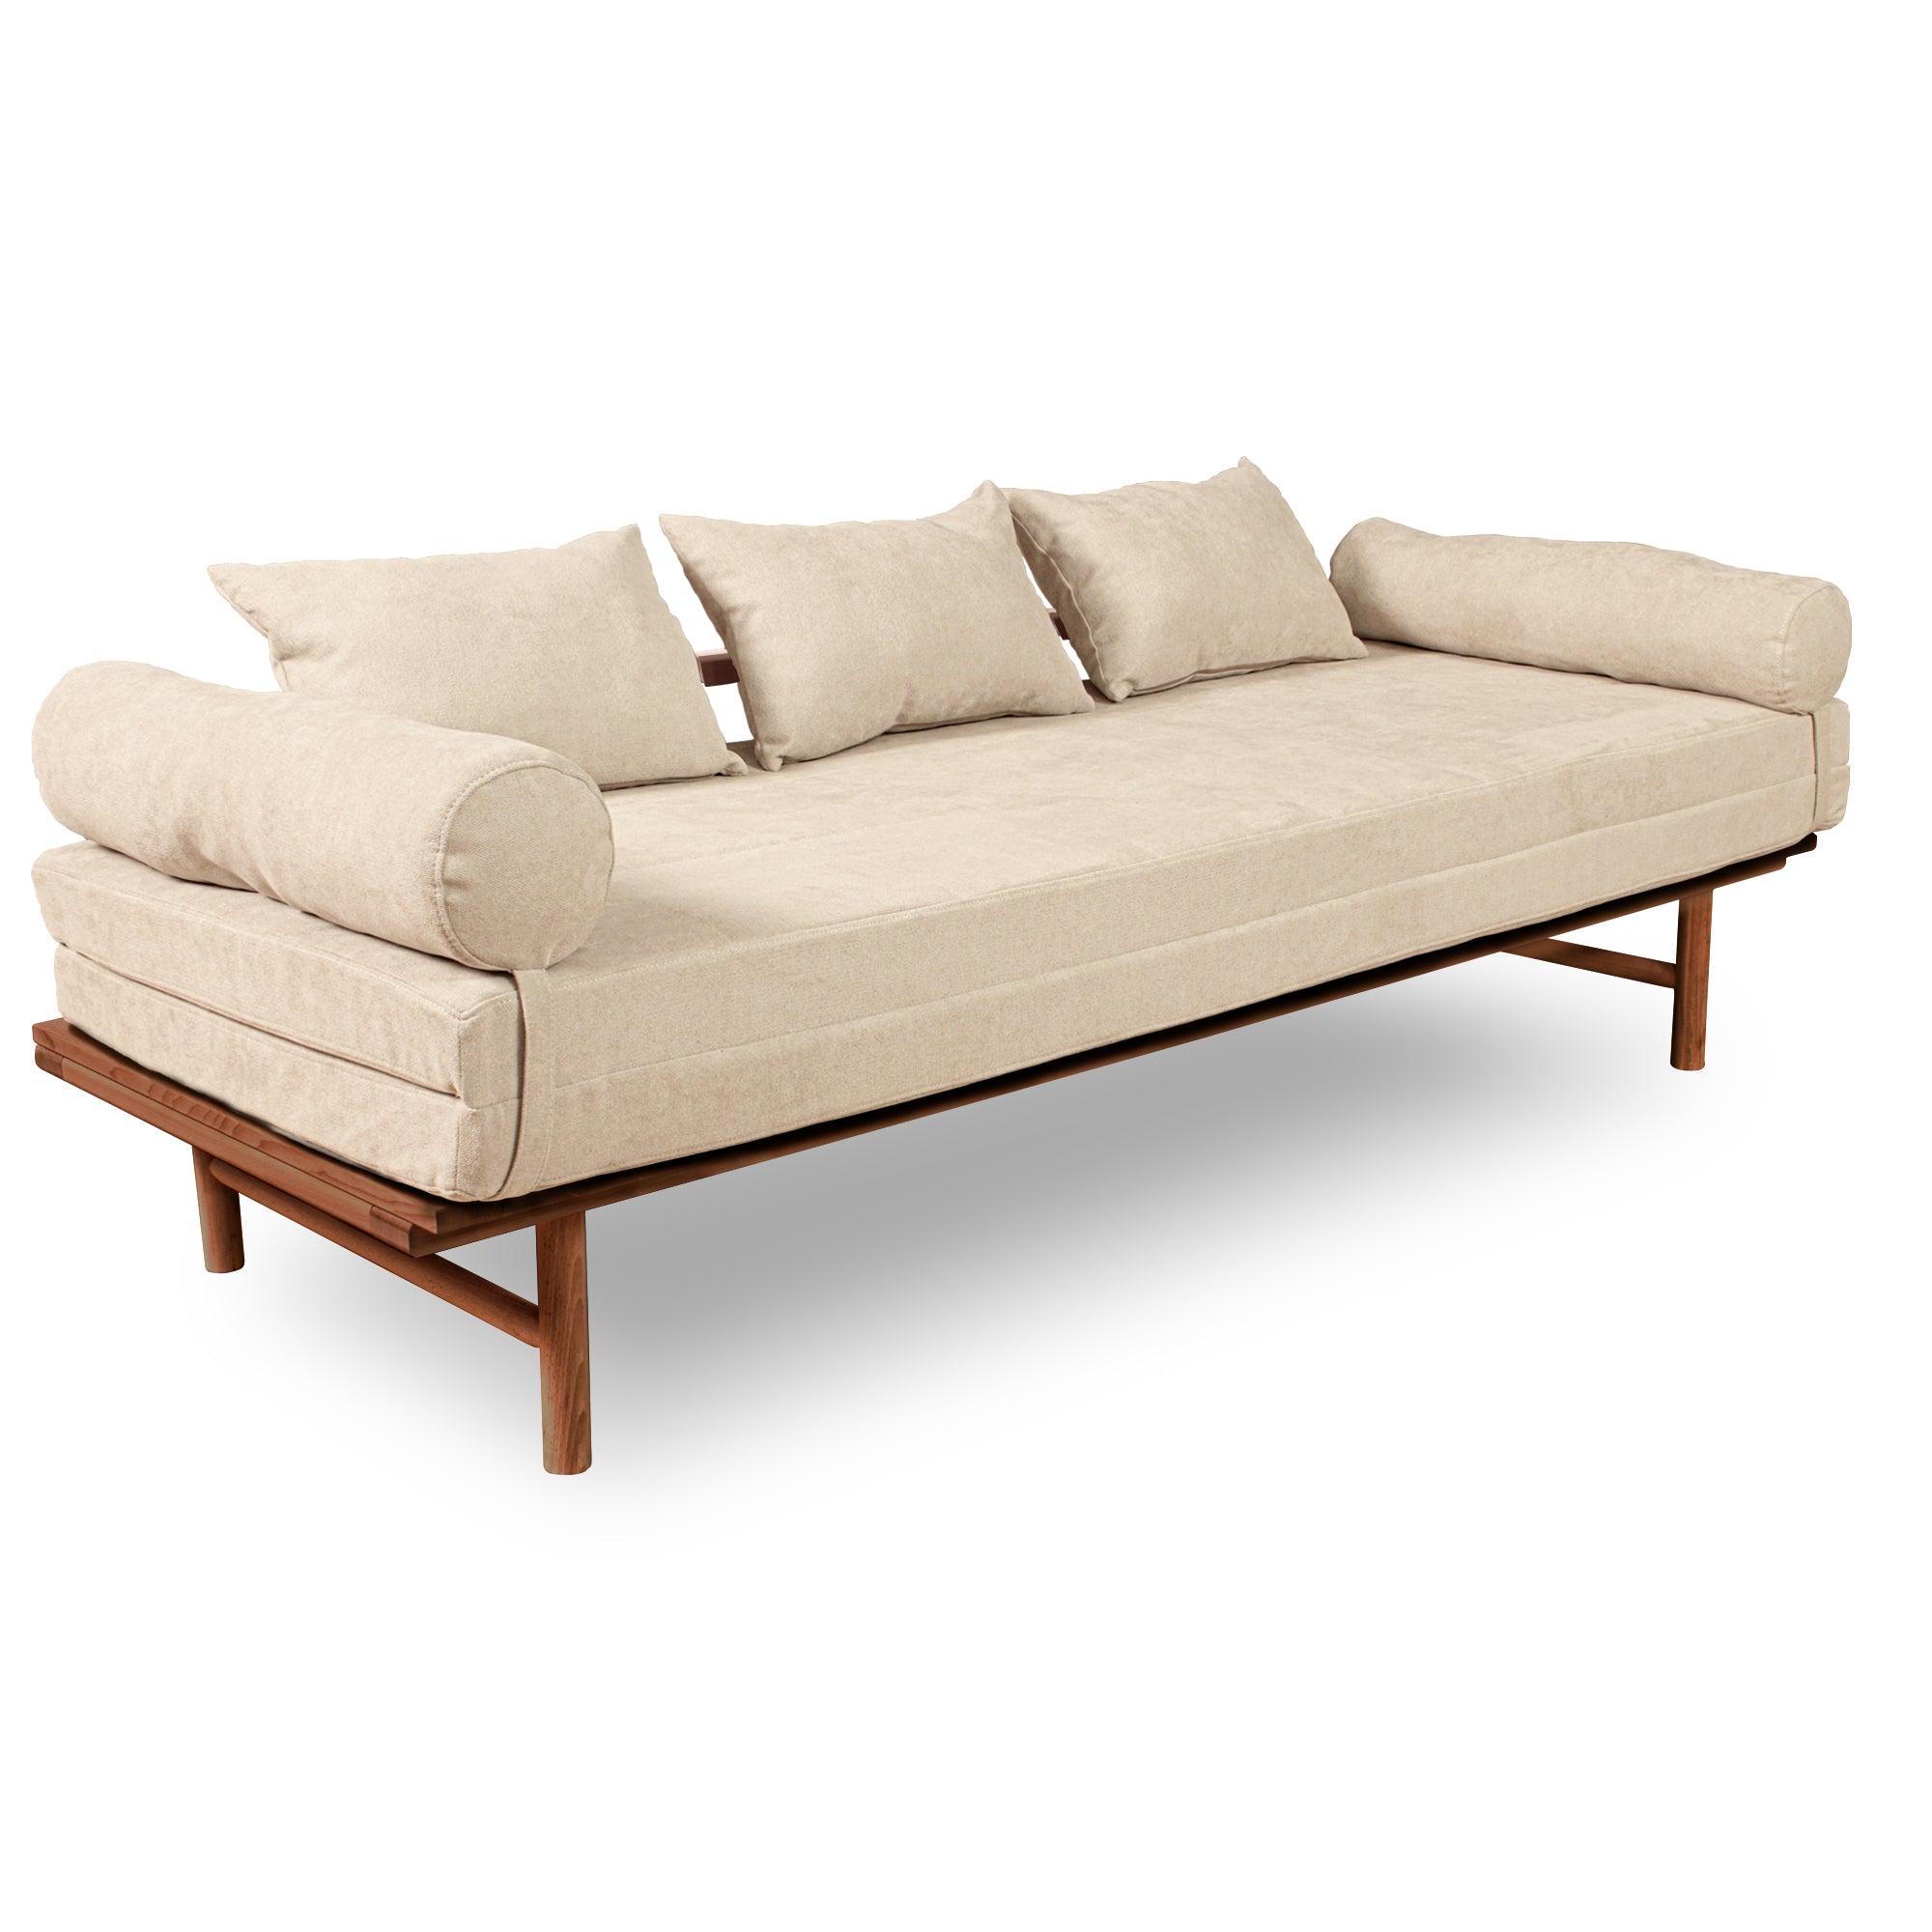 Le MAR Folding Daybed, Beech Wood Frame, Caramel Colour-creamy upholstery